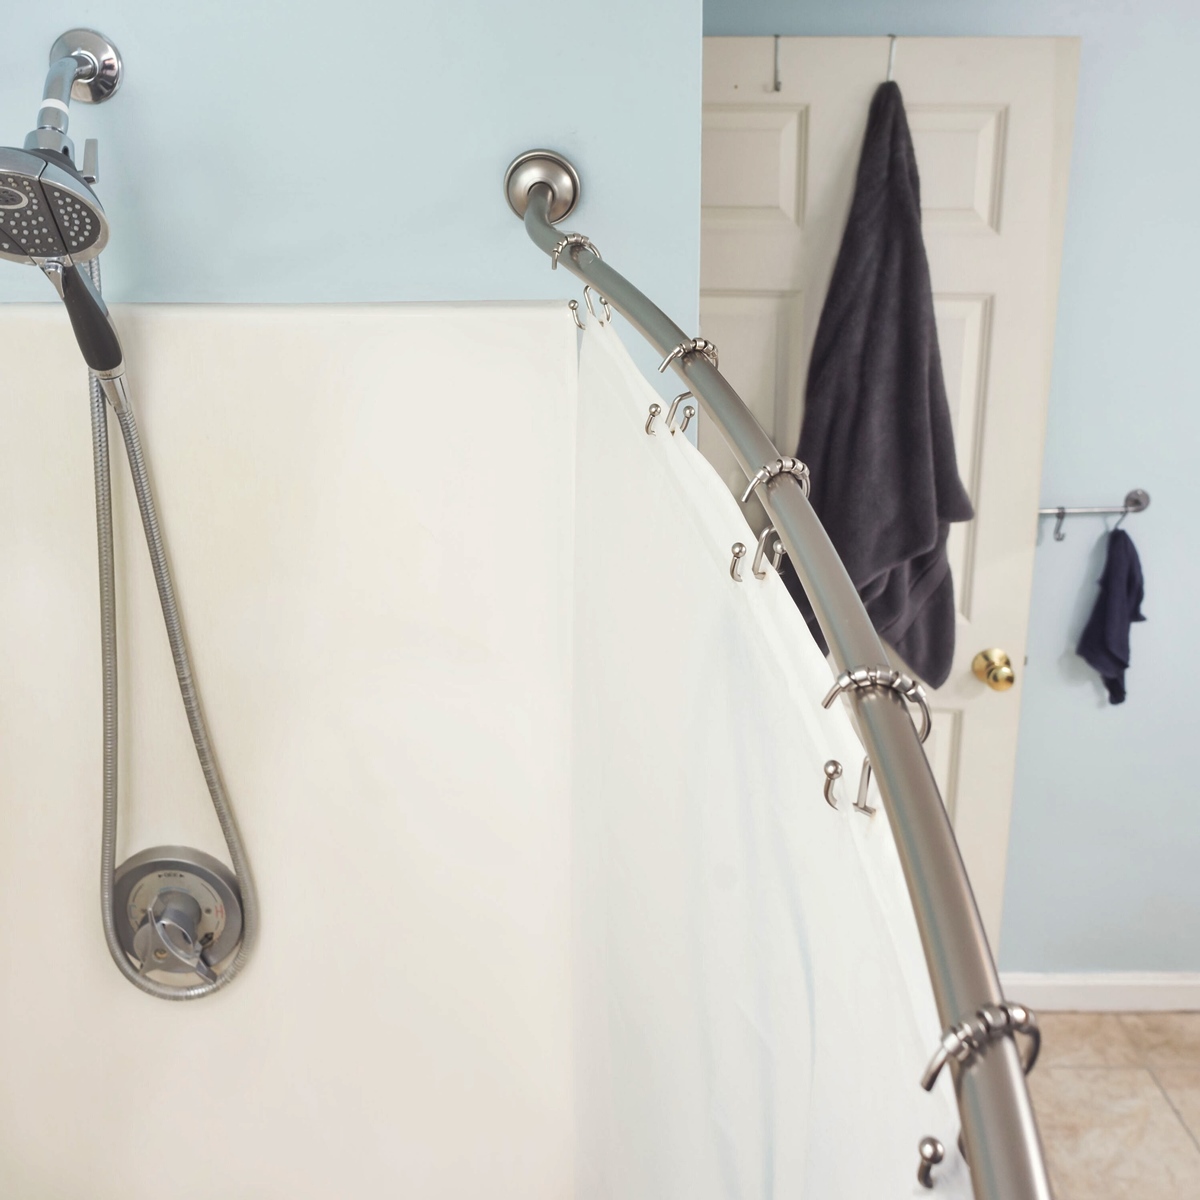 How To Install Curved Shower Curtain Rod